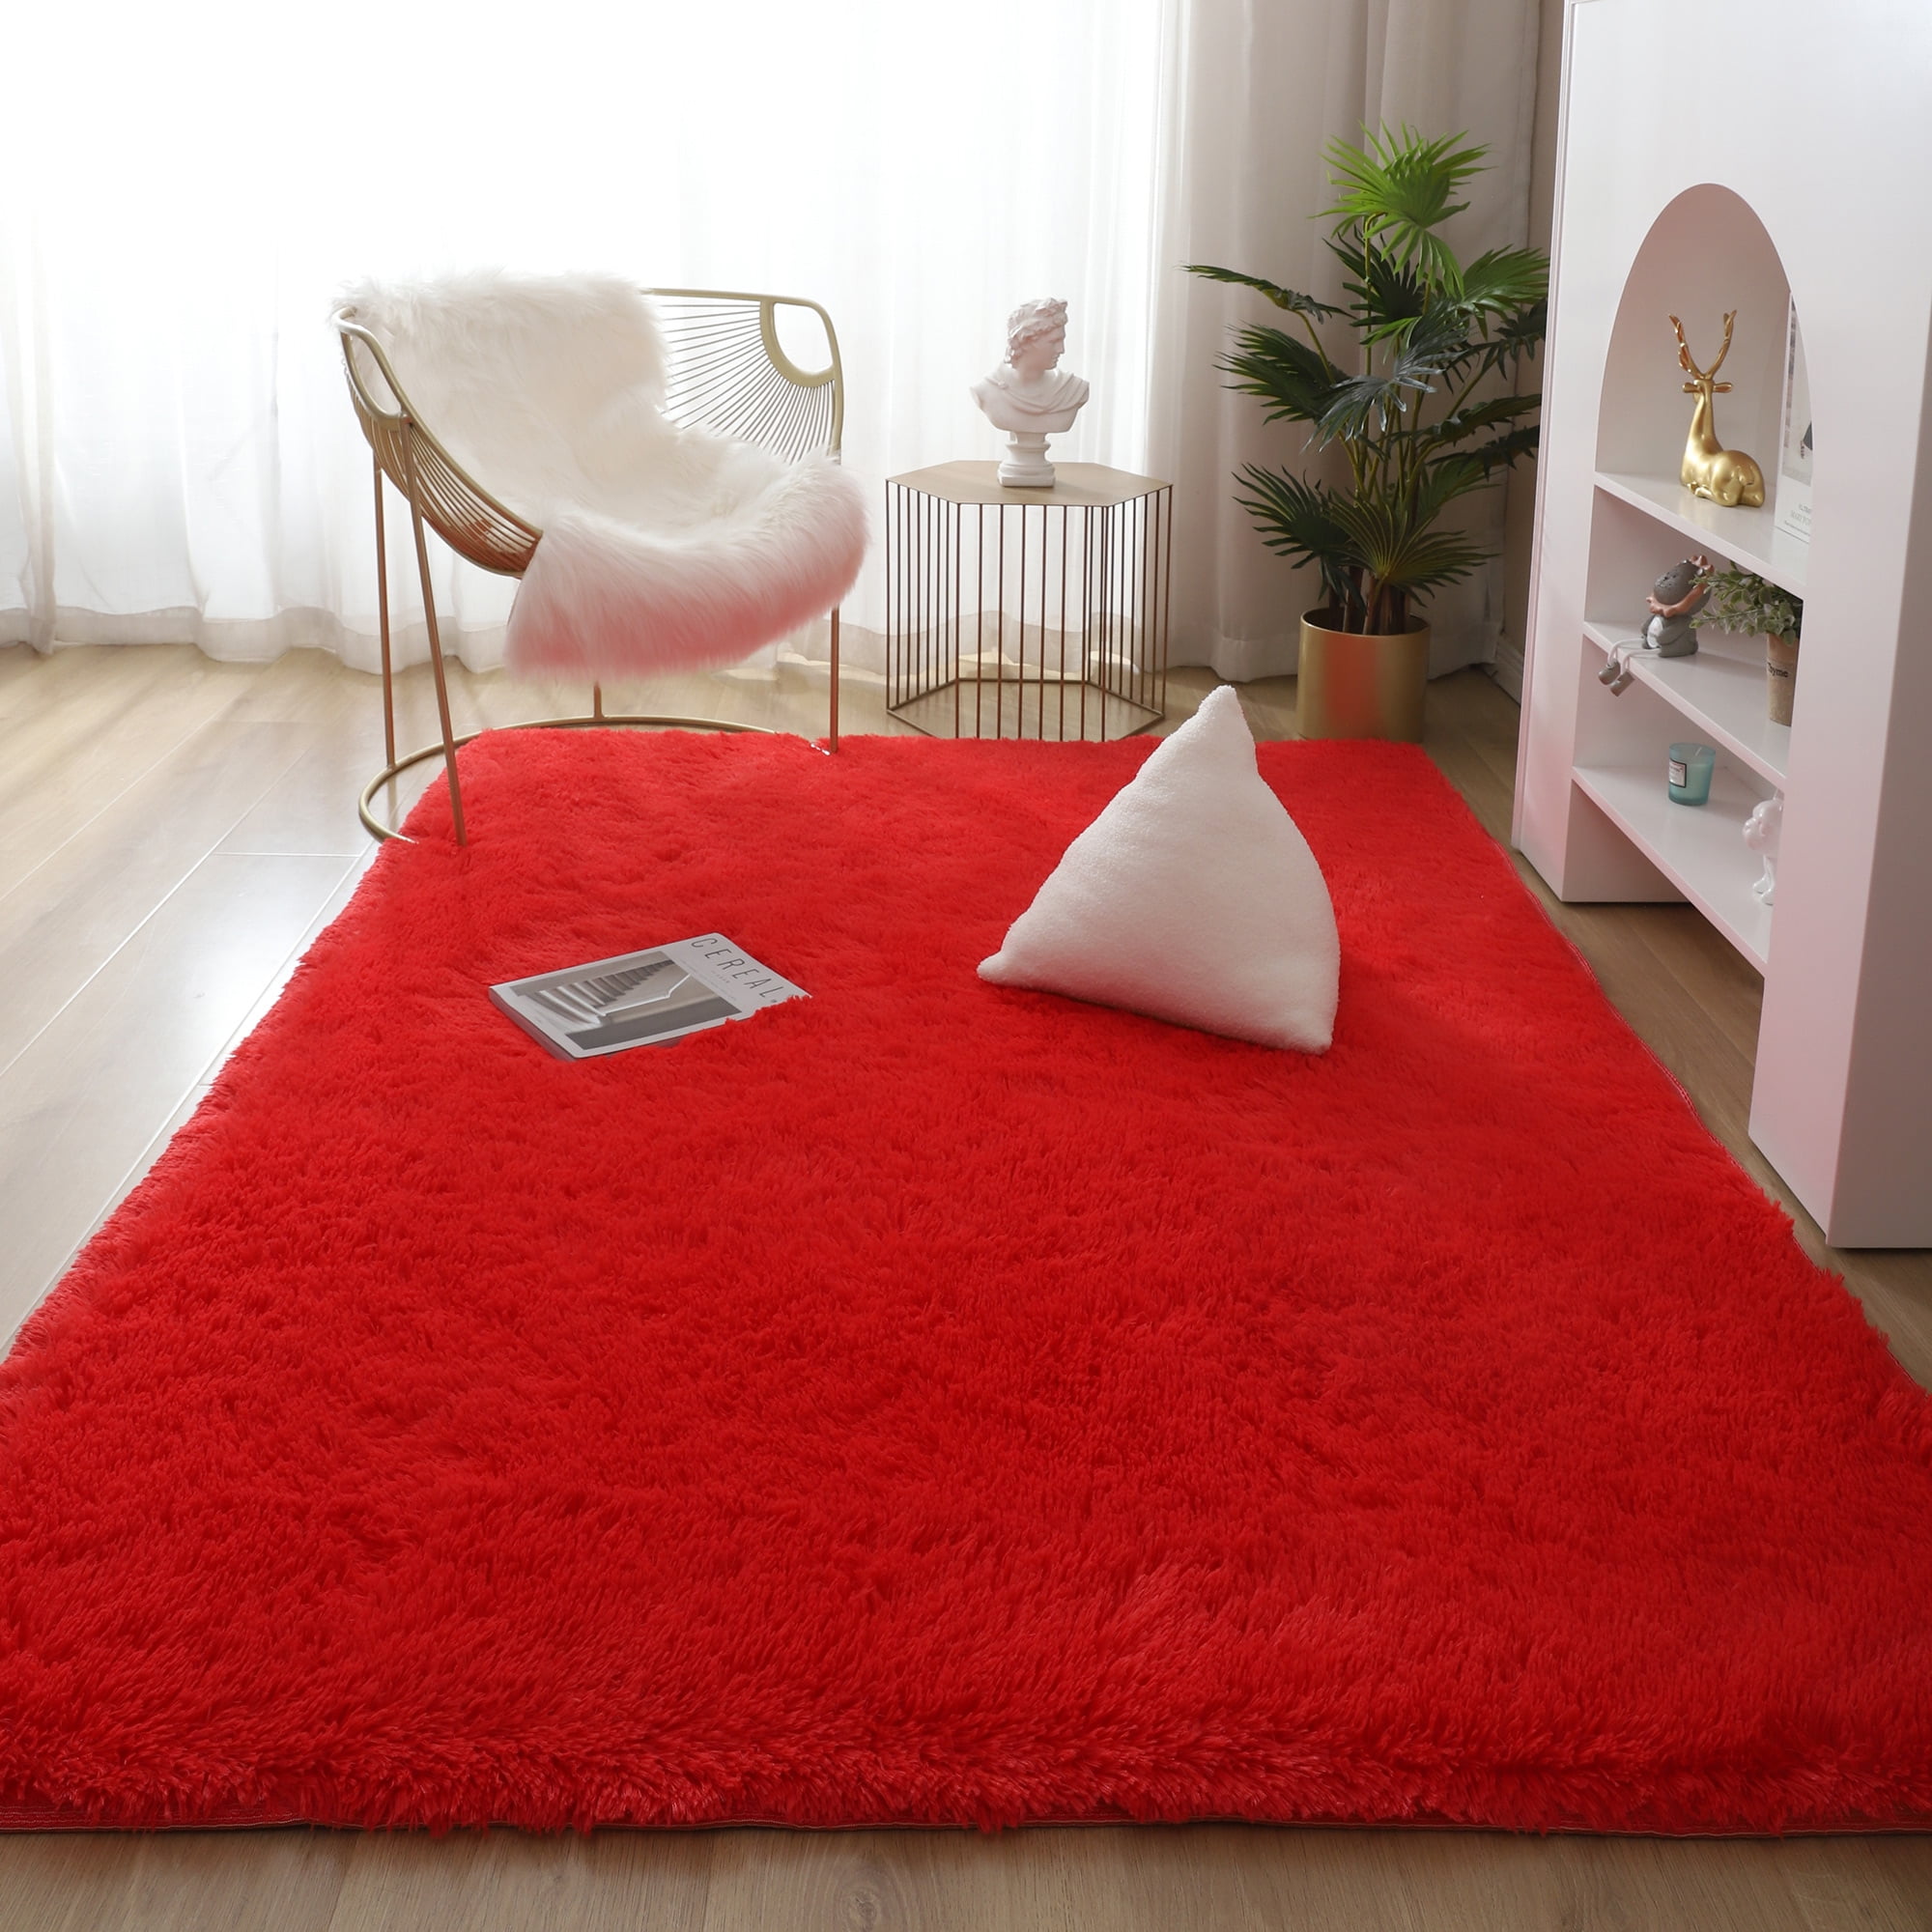 Youloveit Soft Area Rugs Faux Fur Rug, What Is The Softest Area Rug Material